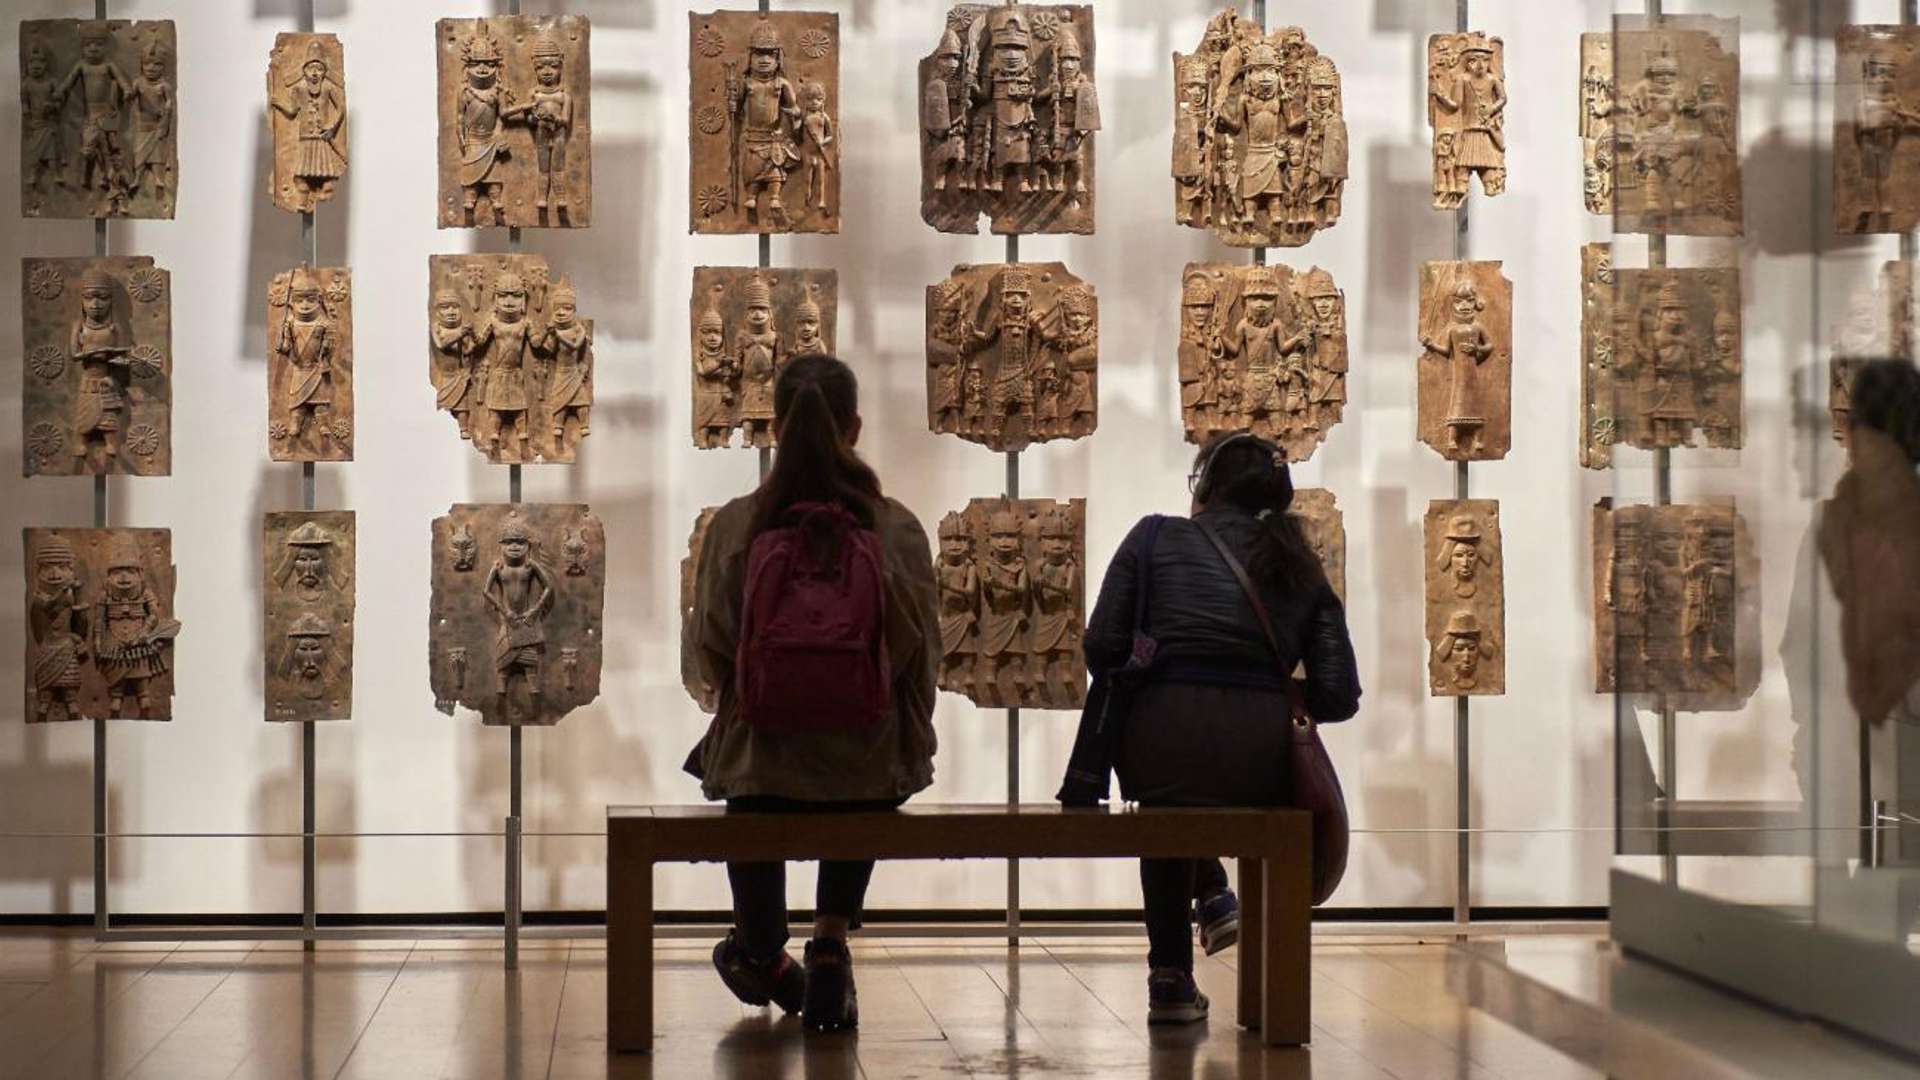 An image of two visitors sitting in front of the Benin Bronzes on display at the British Museum.